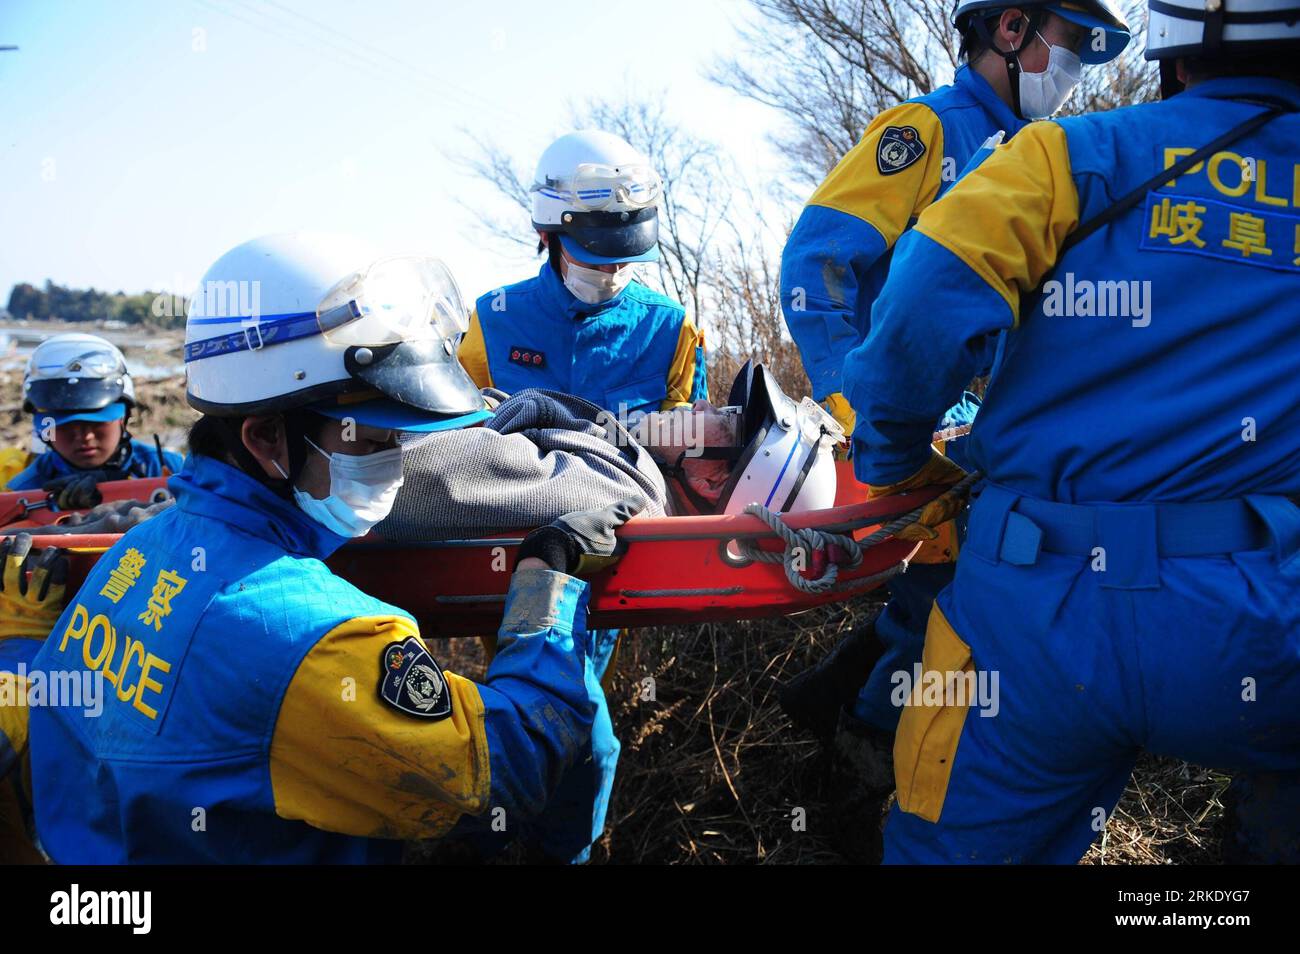 Bildnummer: 55019313  Datum: 13.03.2011  Copyright: imago/Xinhua SENDAI, March 13, 2011 (Xinhua) -- Rescuers save a survivor from the deribs in Sanbontsuka of Wakabayashi in Sendai City, Miyagi Prefecture, Japan, March 13, 2011. The area lost contact with the outside world after Friday s quake. Friday s catastrophic earthquake in Japan and the following devastating tsunami have ravaged the country, while massive rescue and recovery efforts have been quickly launched to save lives and minimize losses. (Xinhua/Ji Chunpeng)(yc) JAPAN-QUAKE PUBLICATIONxNOTxINxCHN Gesellschaft Naturkatastrophe Erdb Stock Photo